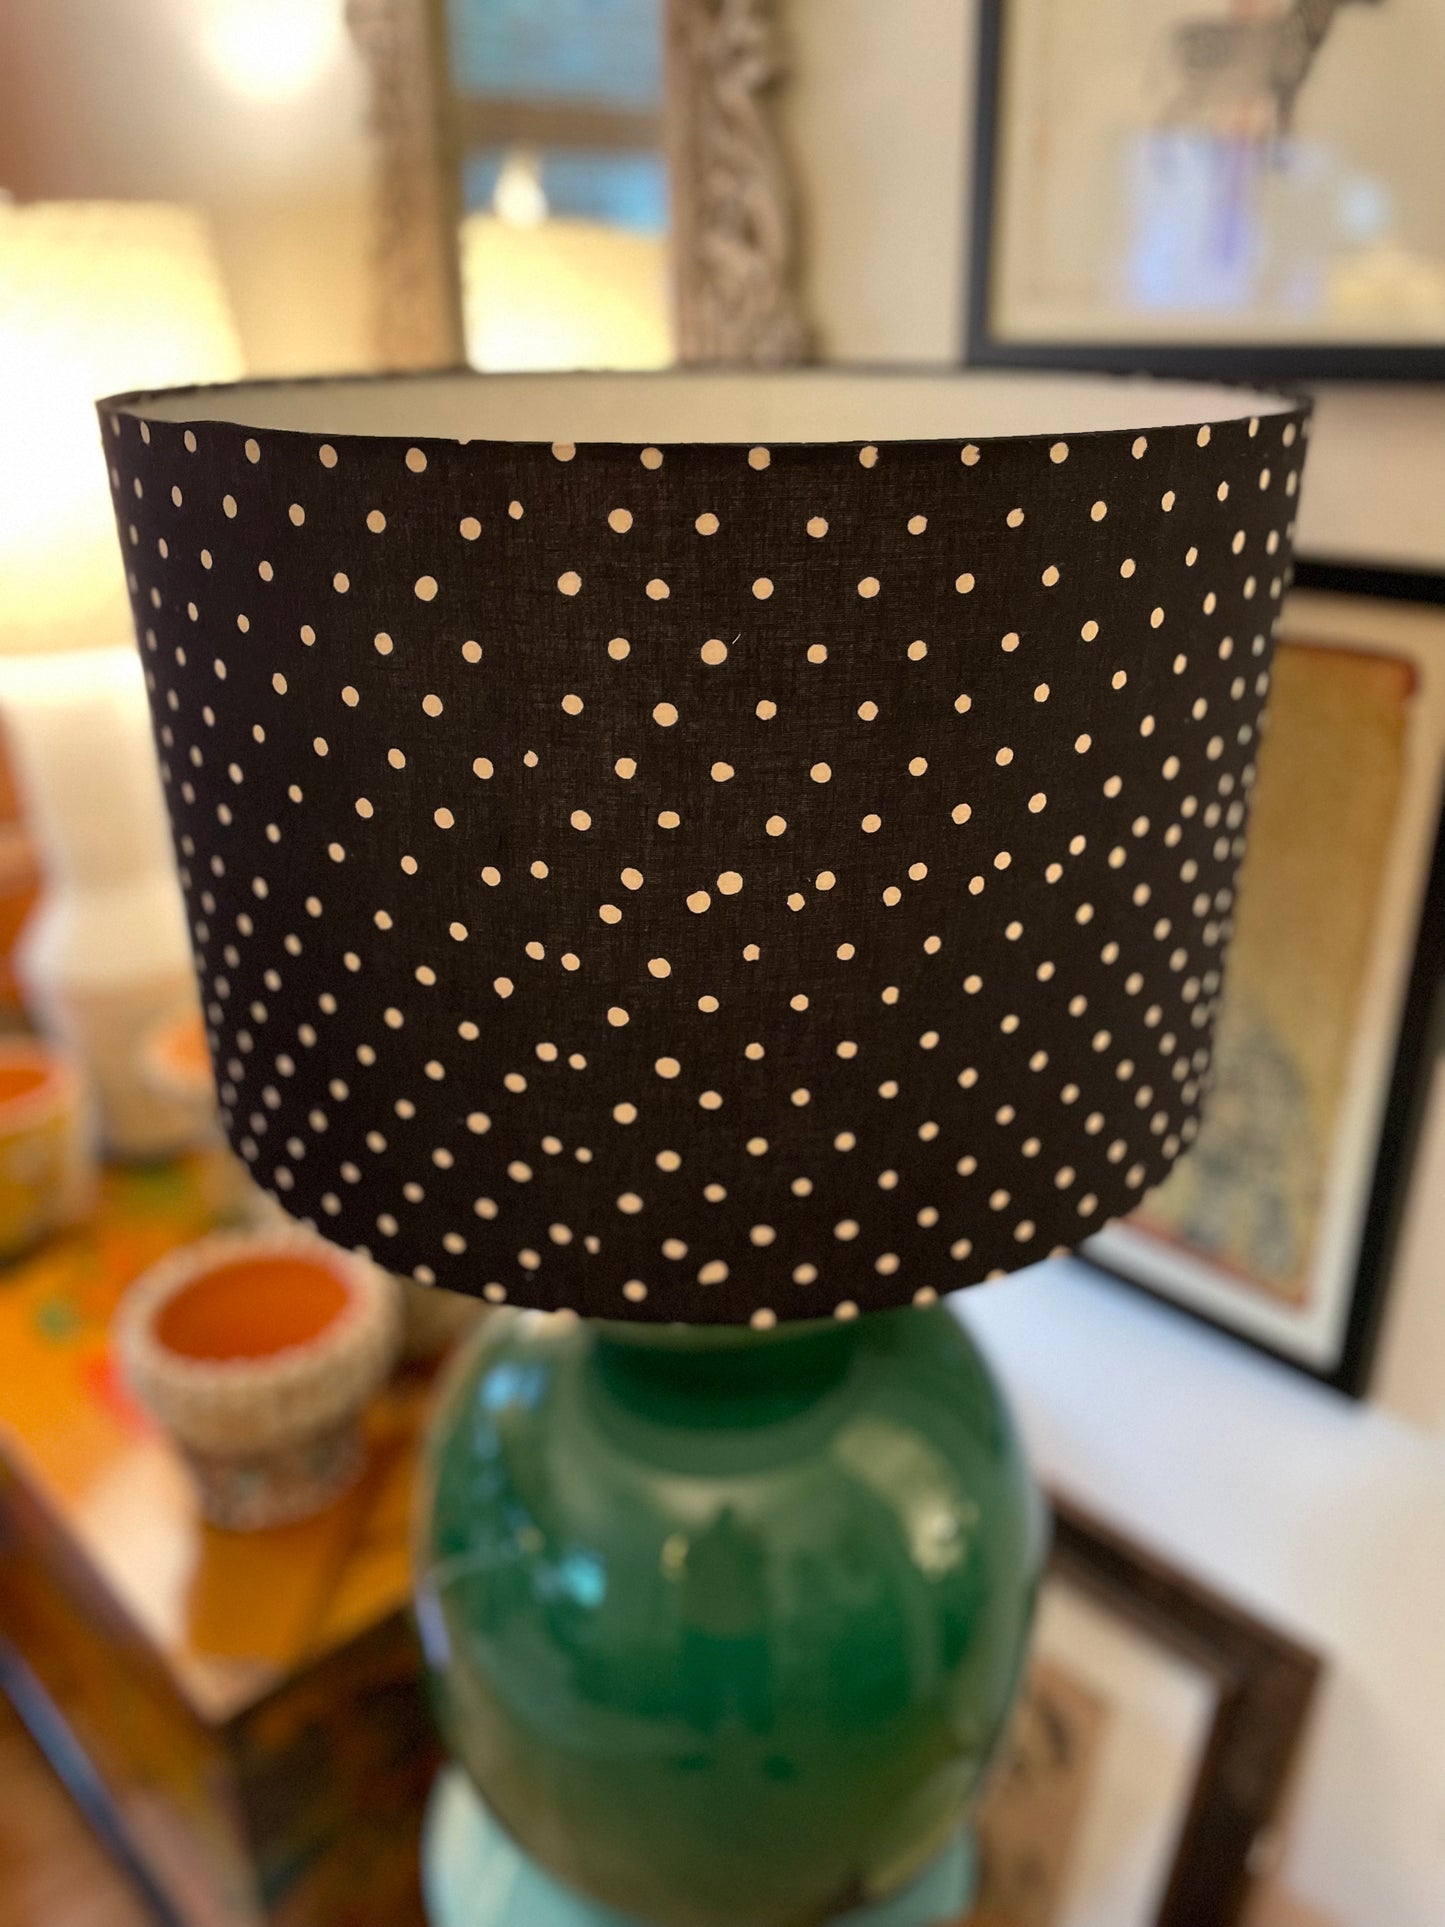 16 Inch Drum Lampshade. Indian Hand Block Print. Black with Gentle Off-White Polka Dot.